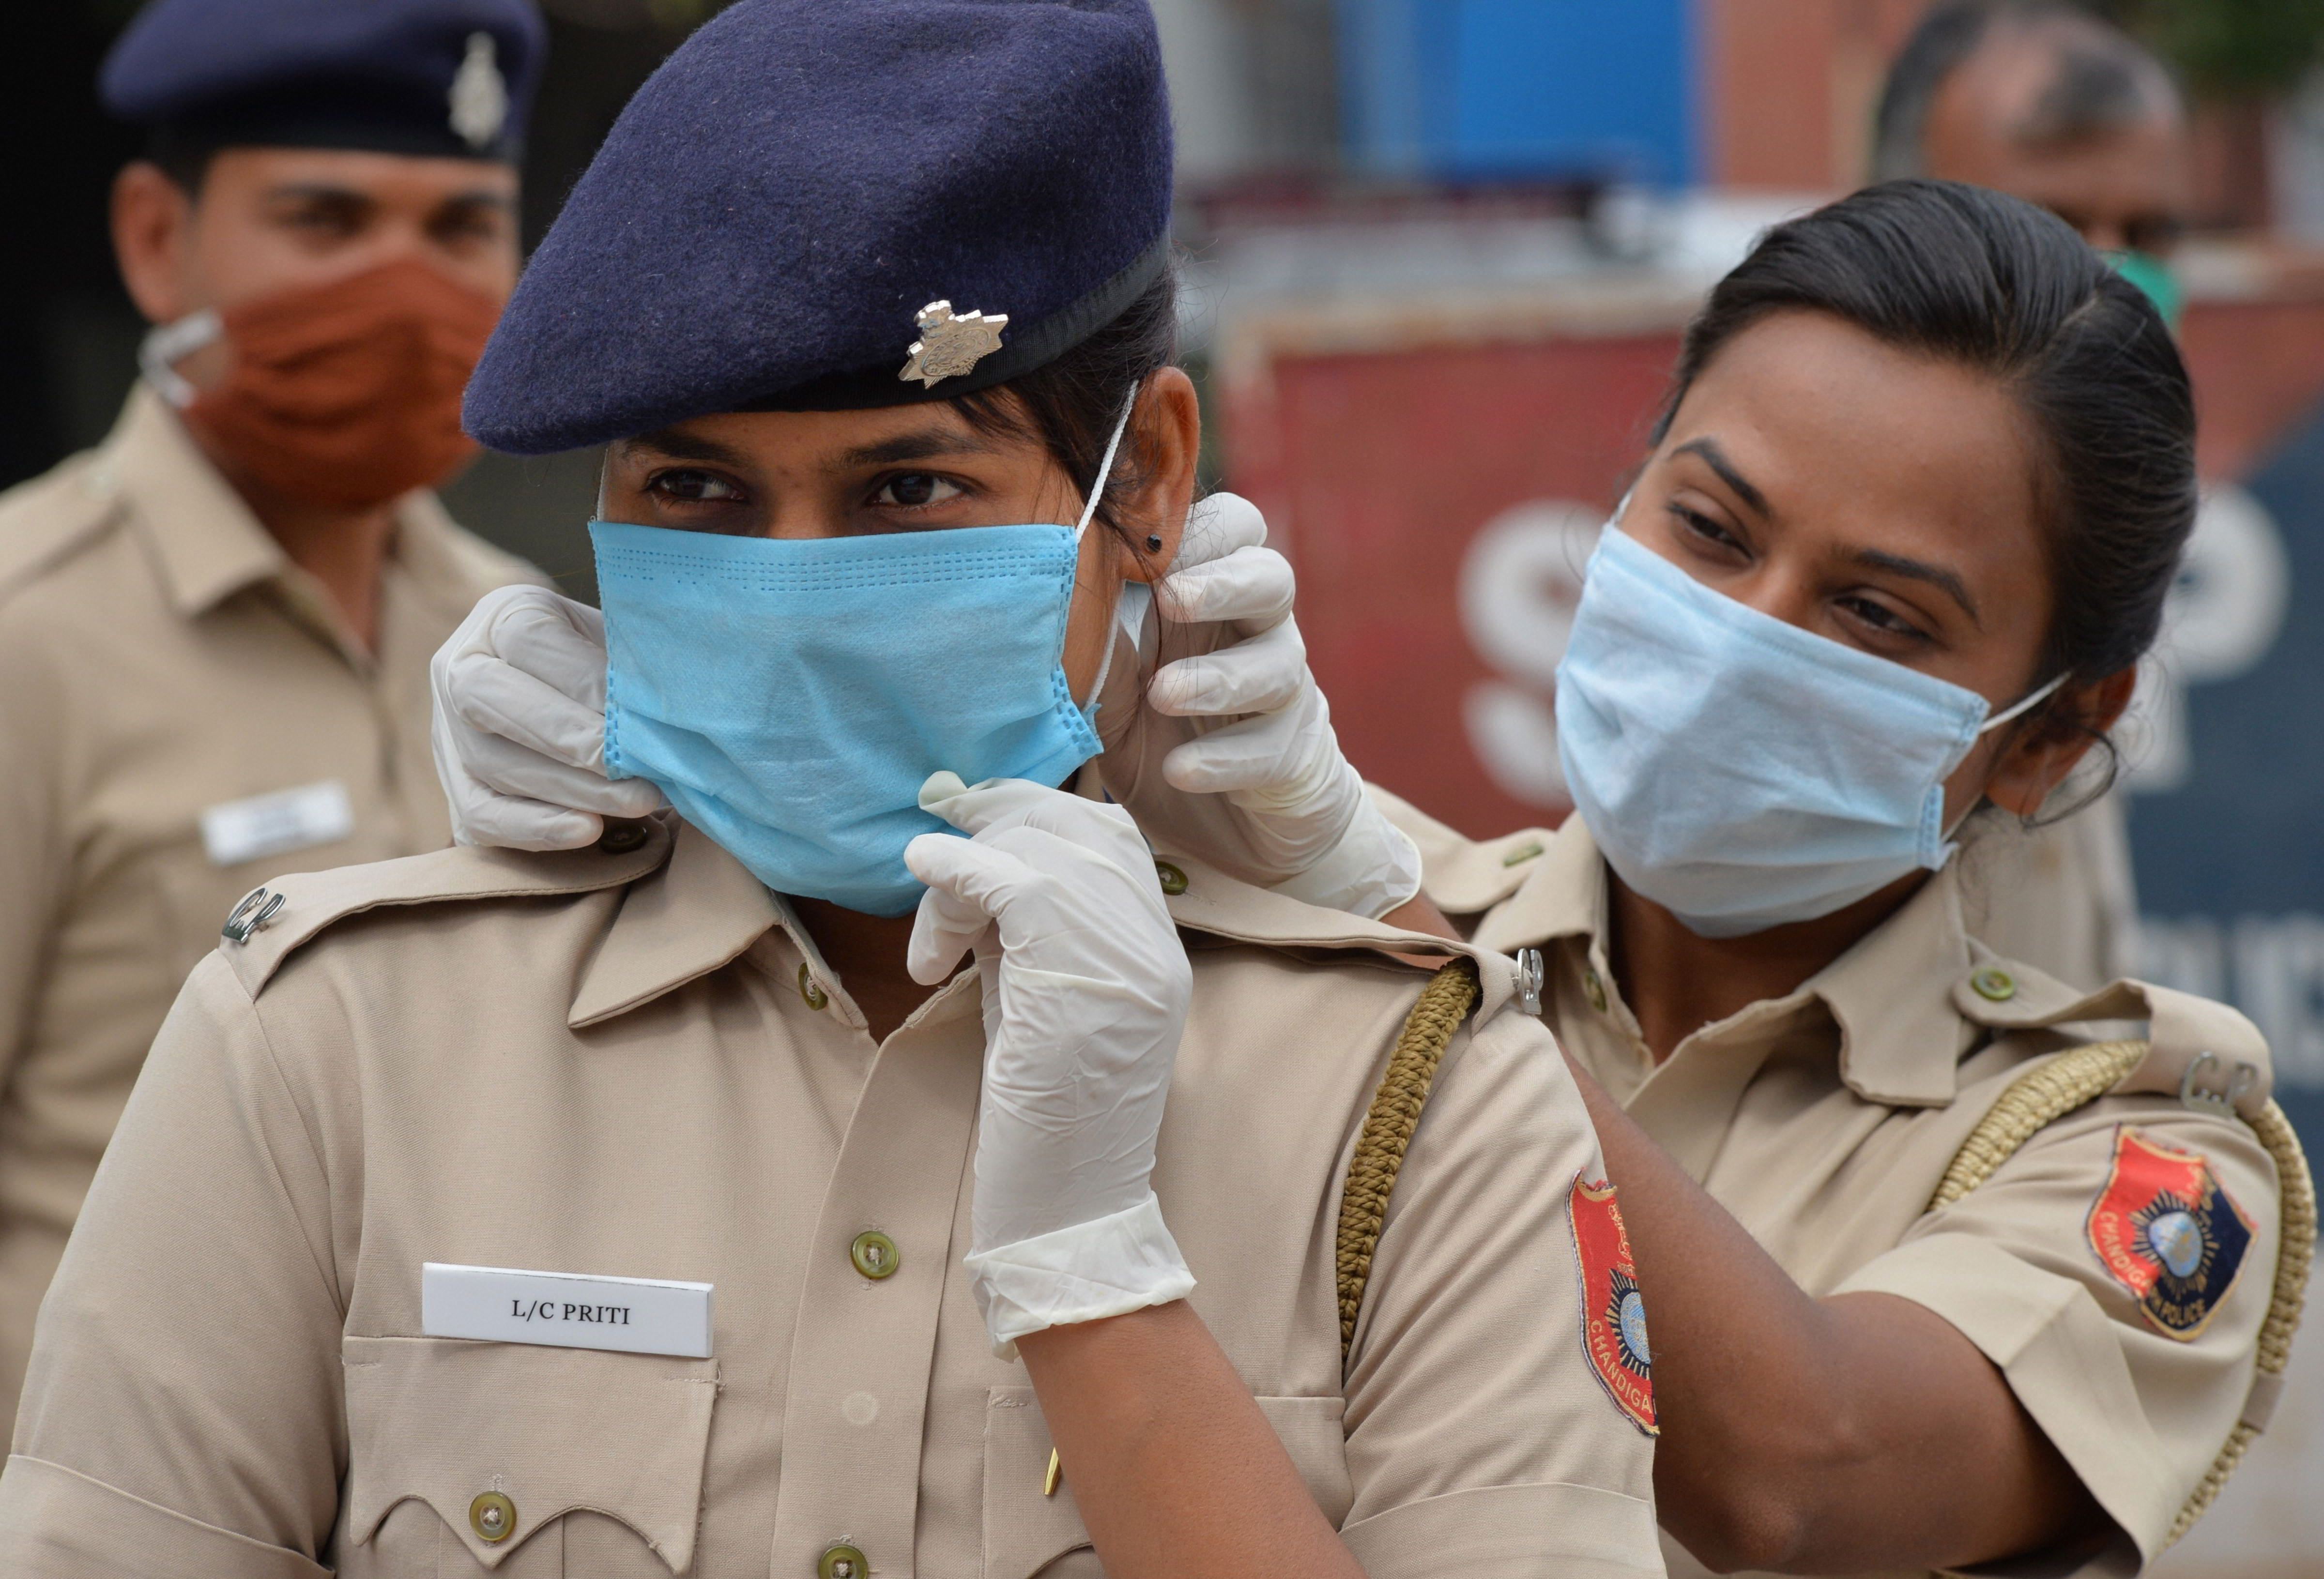 Police personnel wear face masks during a nationwide lockdown in the wake of coronavirus pandemic, in Chandigarh, Friday, April 10, 2020